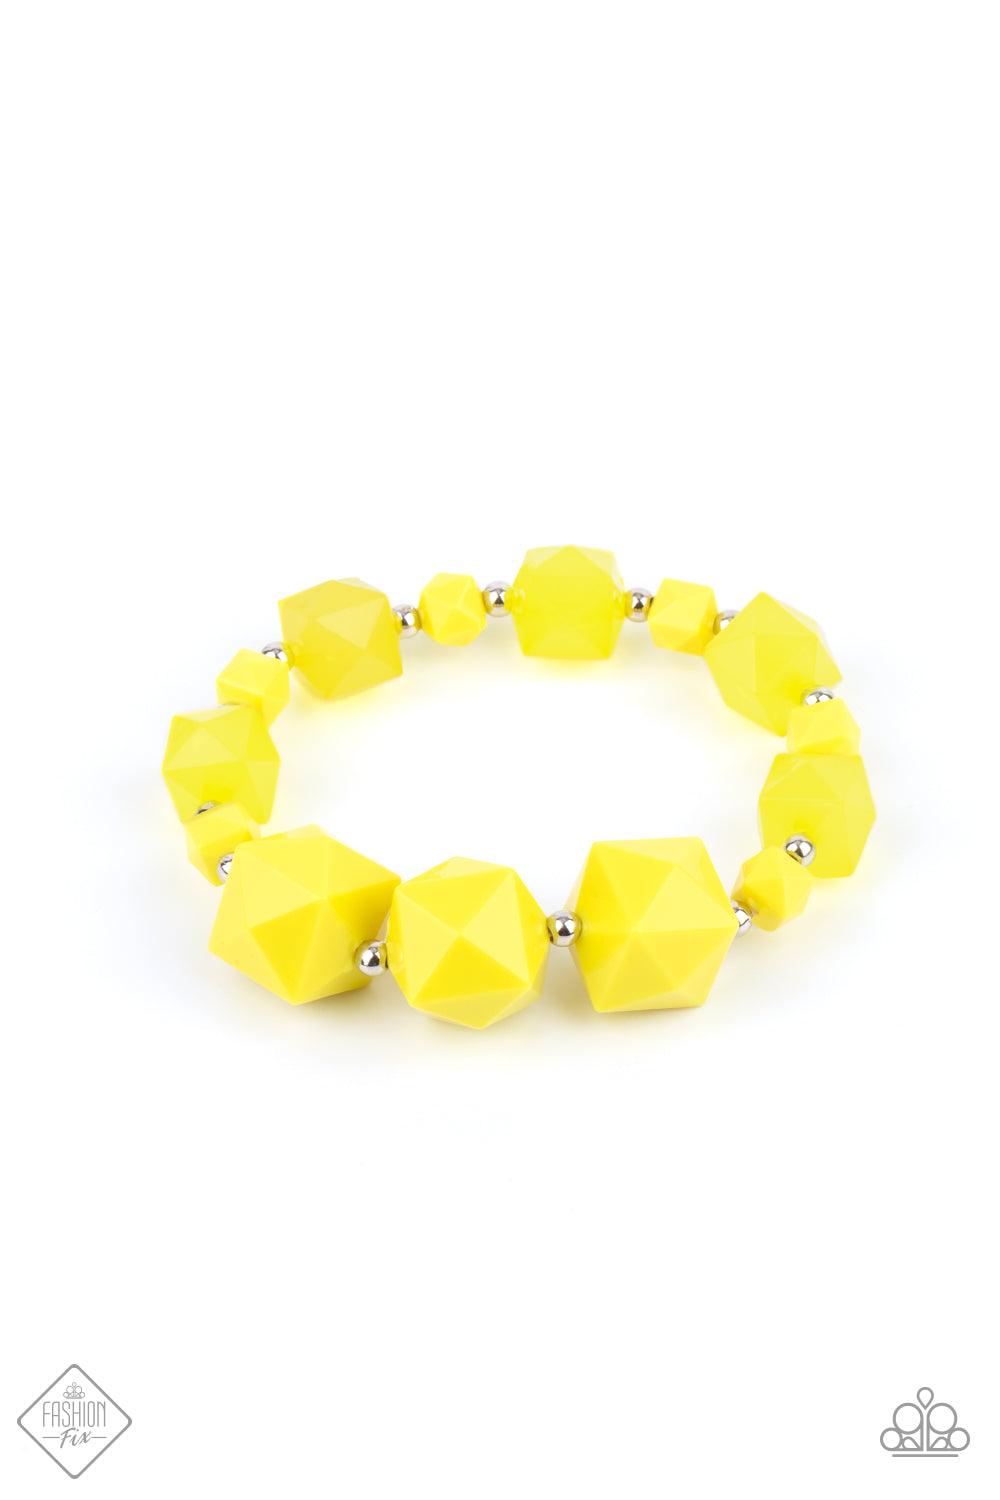 Paparazzi Accessories Trendsetting Tourist - Yellow Varying in size, a faceted collection of solid and opaque Illuminating cube beads alternate with dainty silver beads to decorate a stretchy band that wraps around the wrist for a glamorous pop of geometr